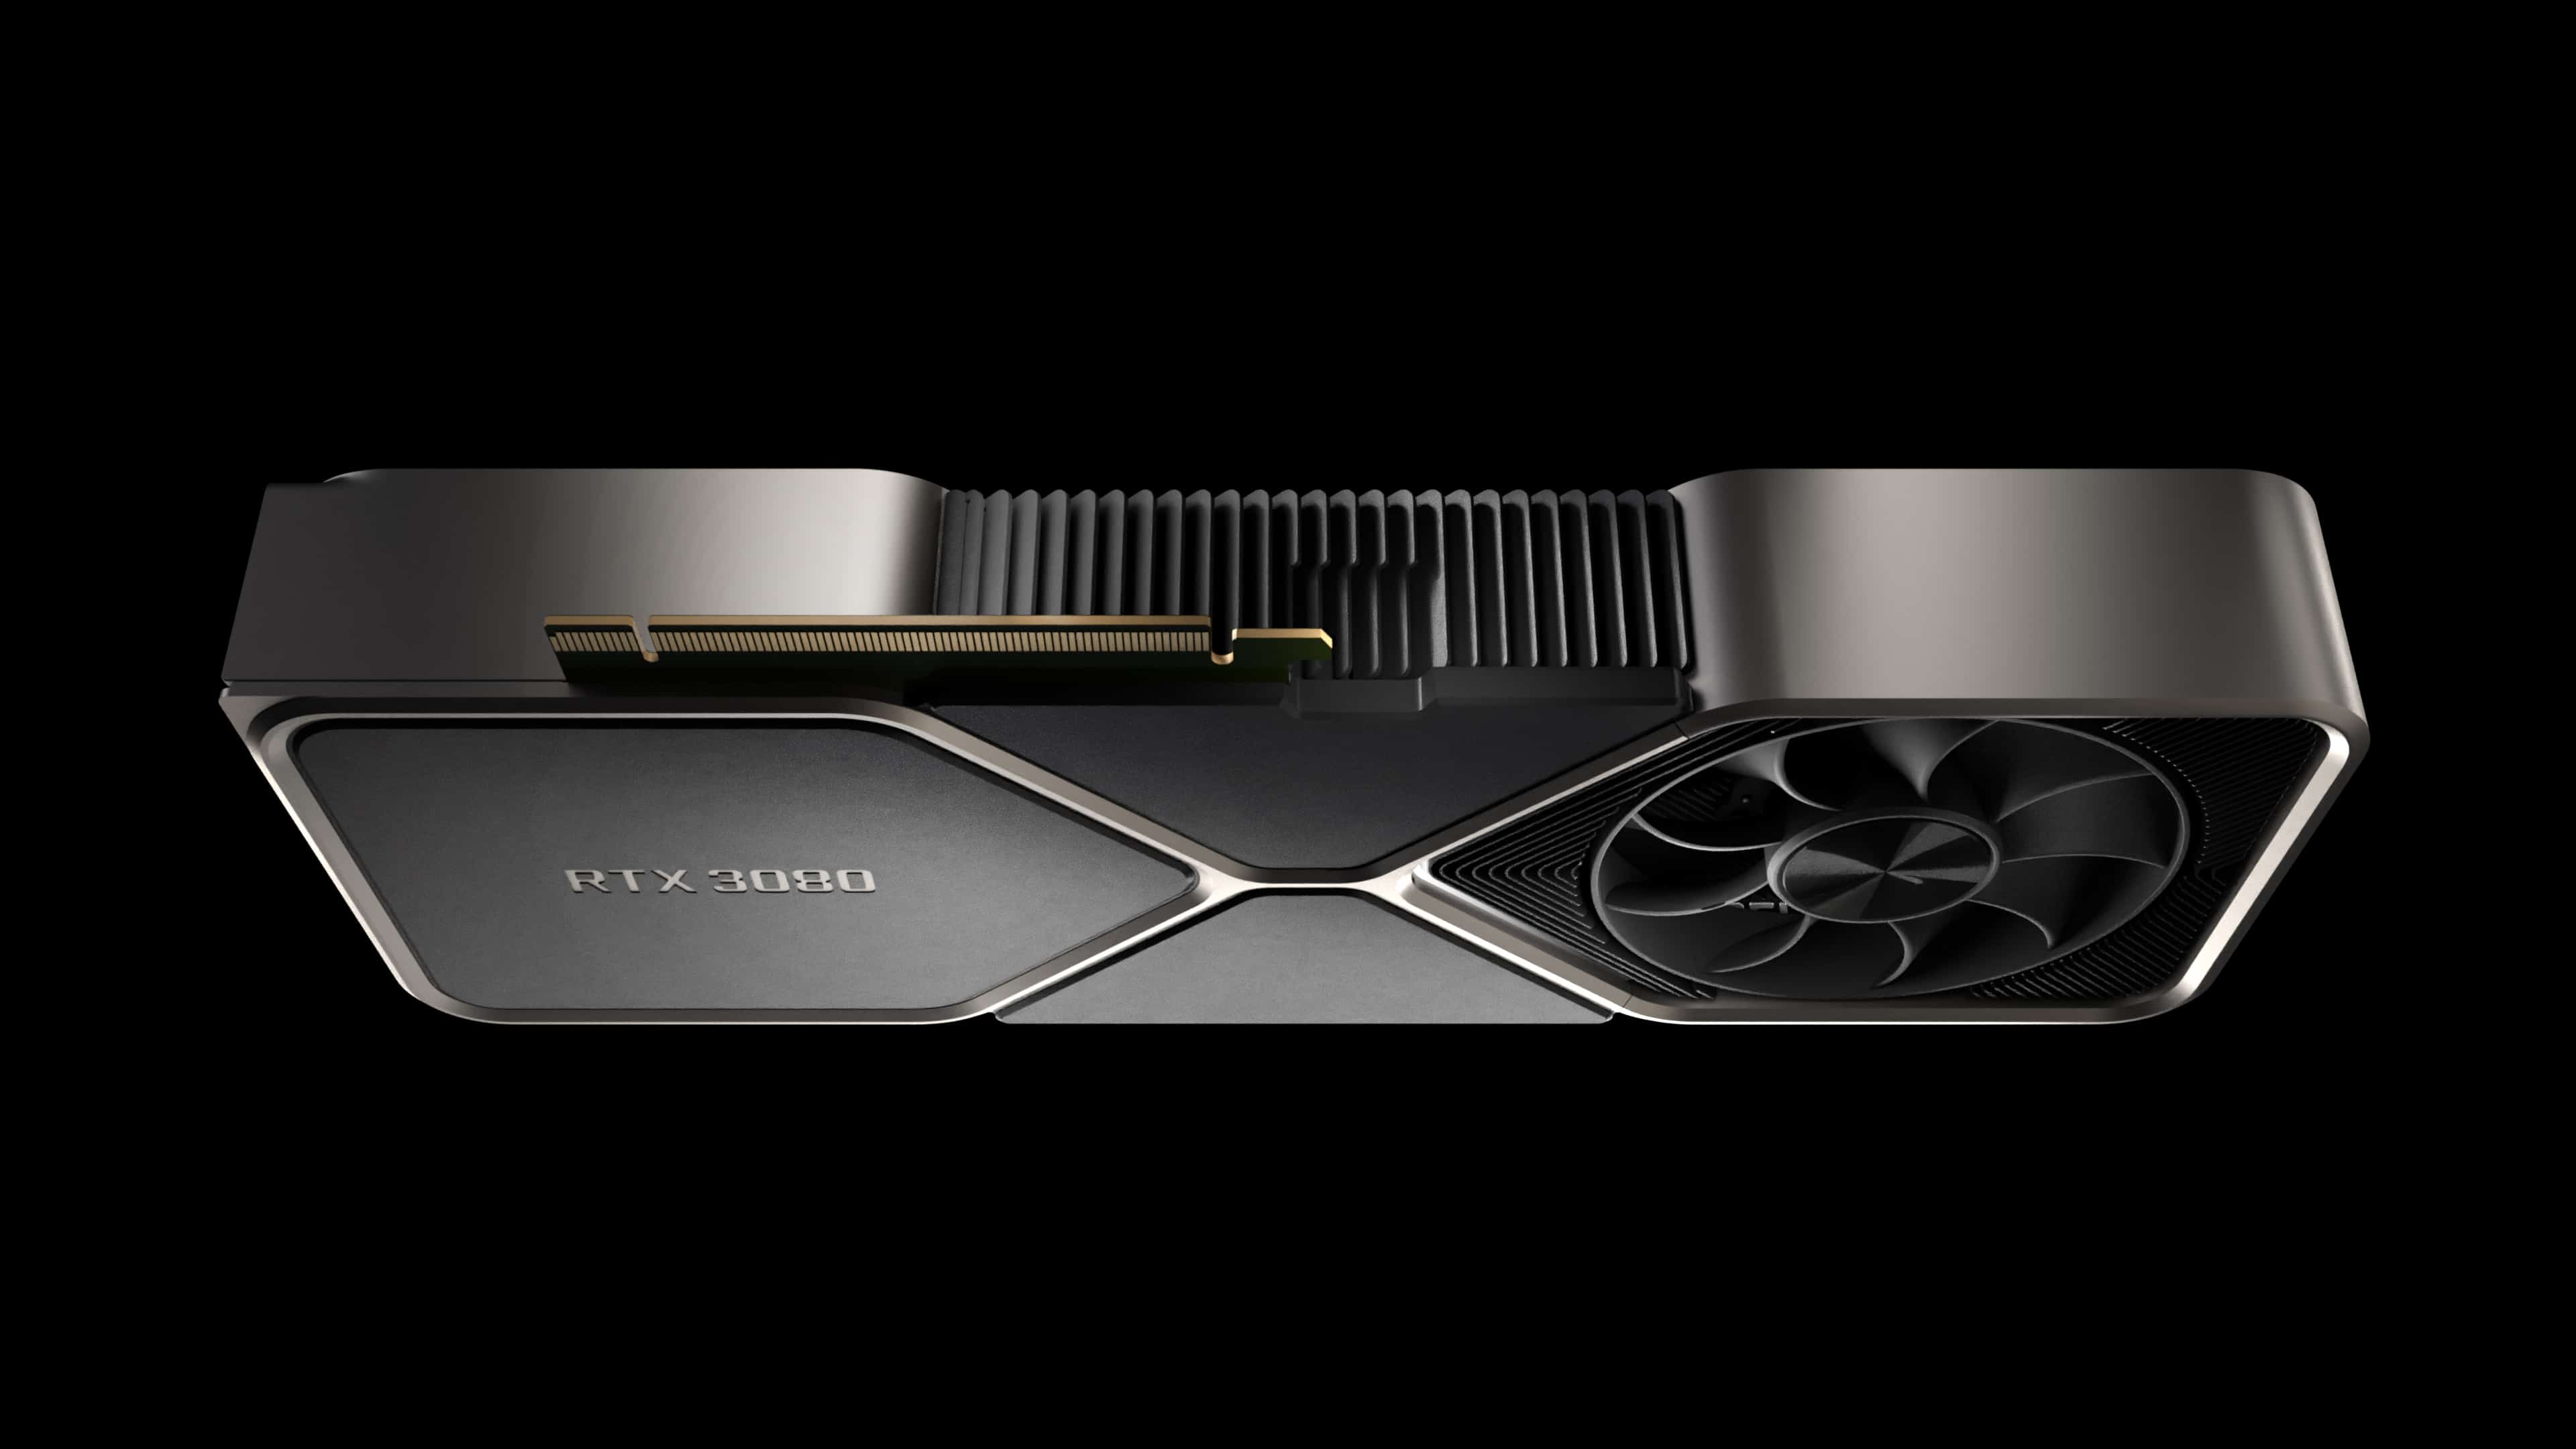 geforce rtx 3080 product gallery full screen 3840 1